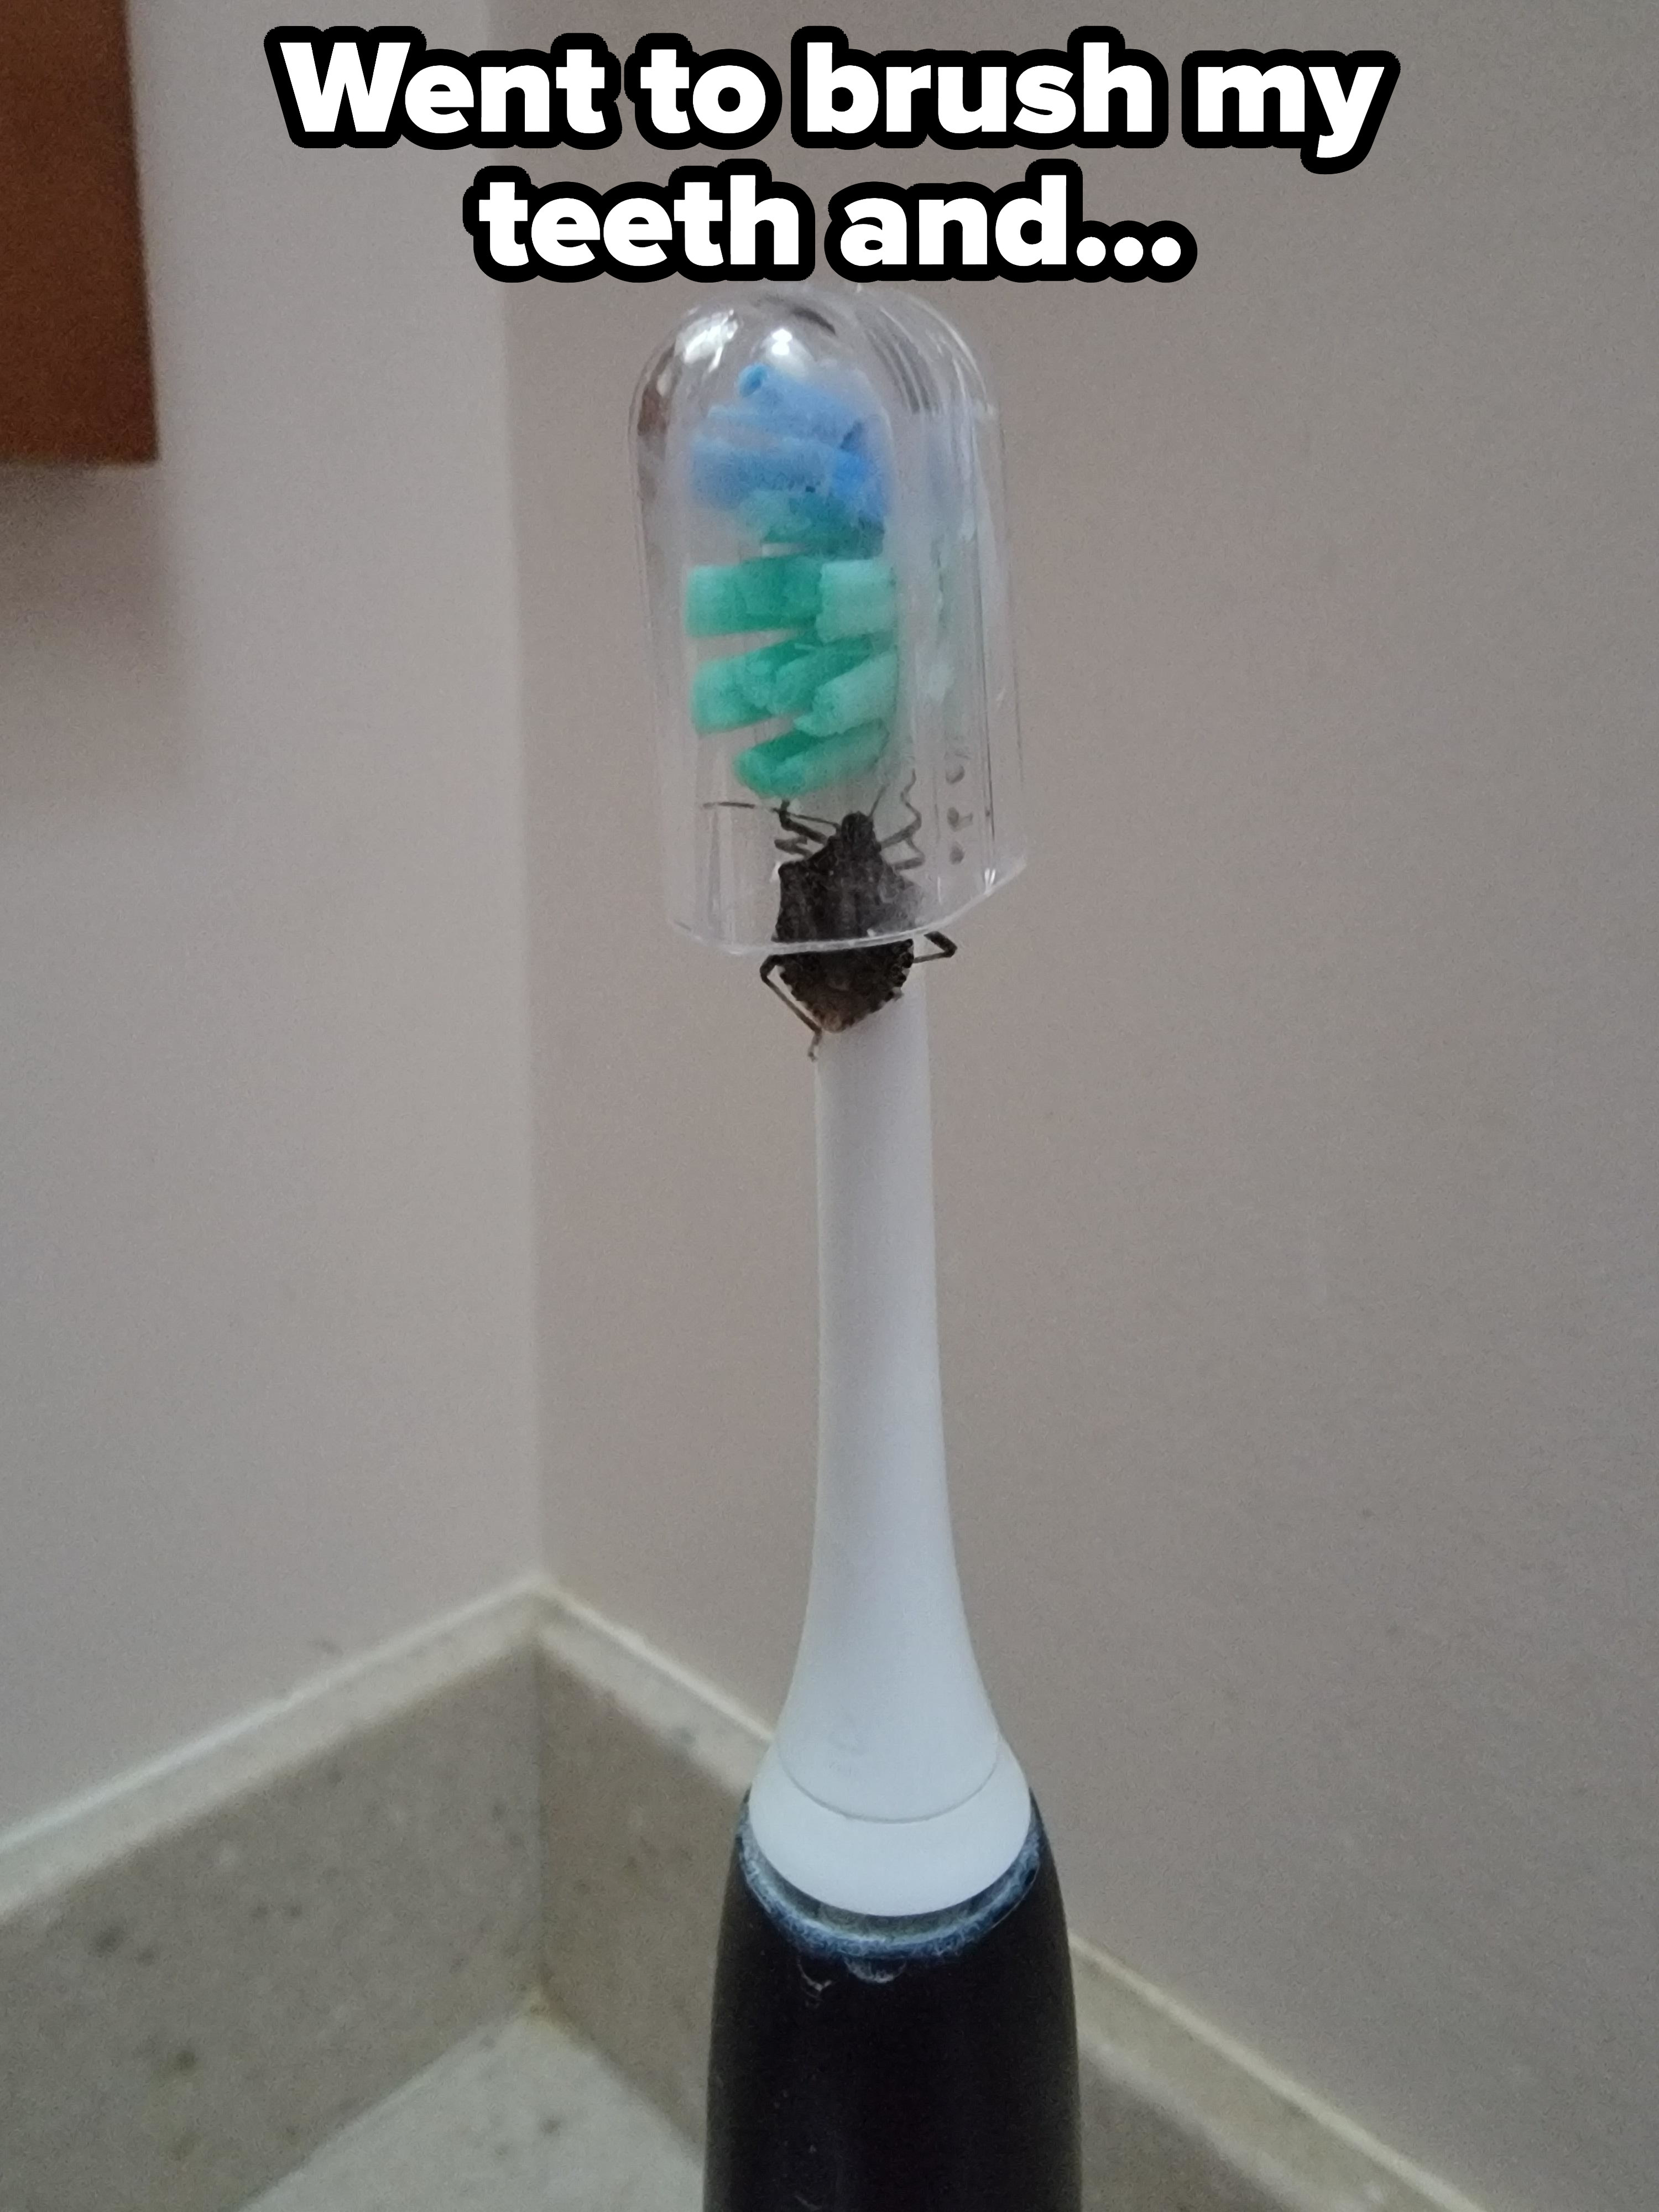 Large bug on a toothbrush